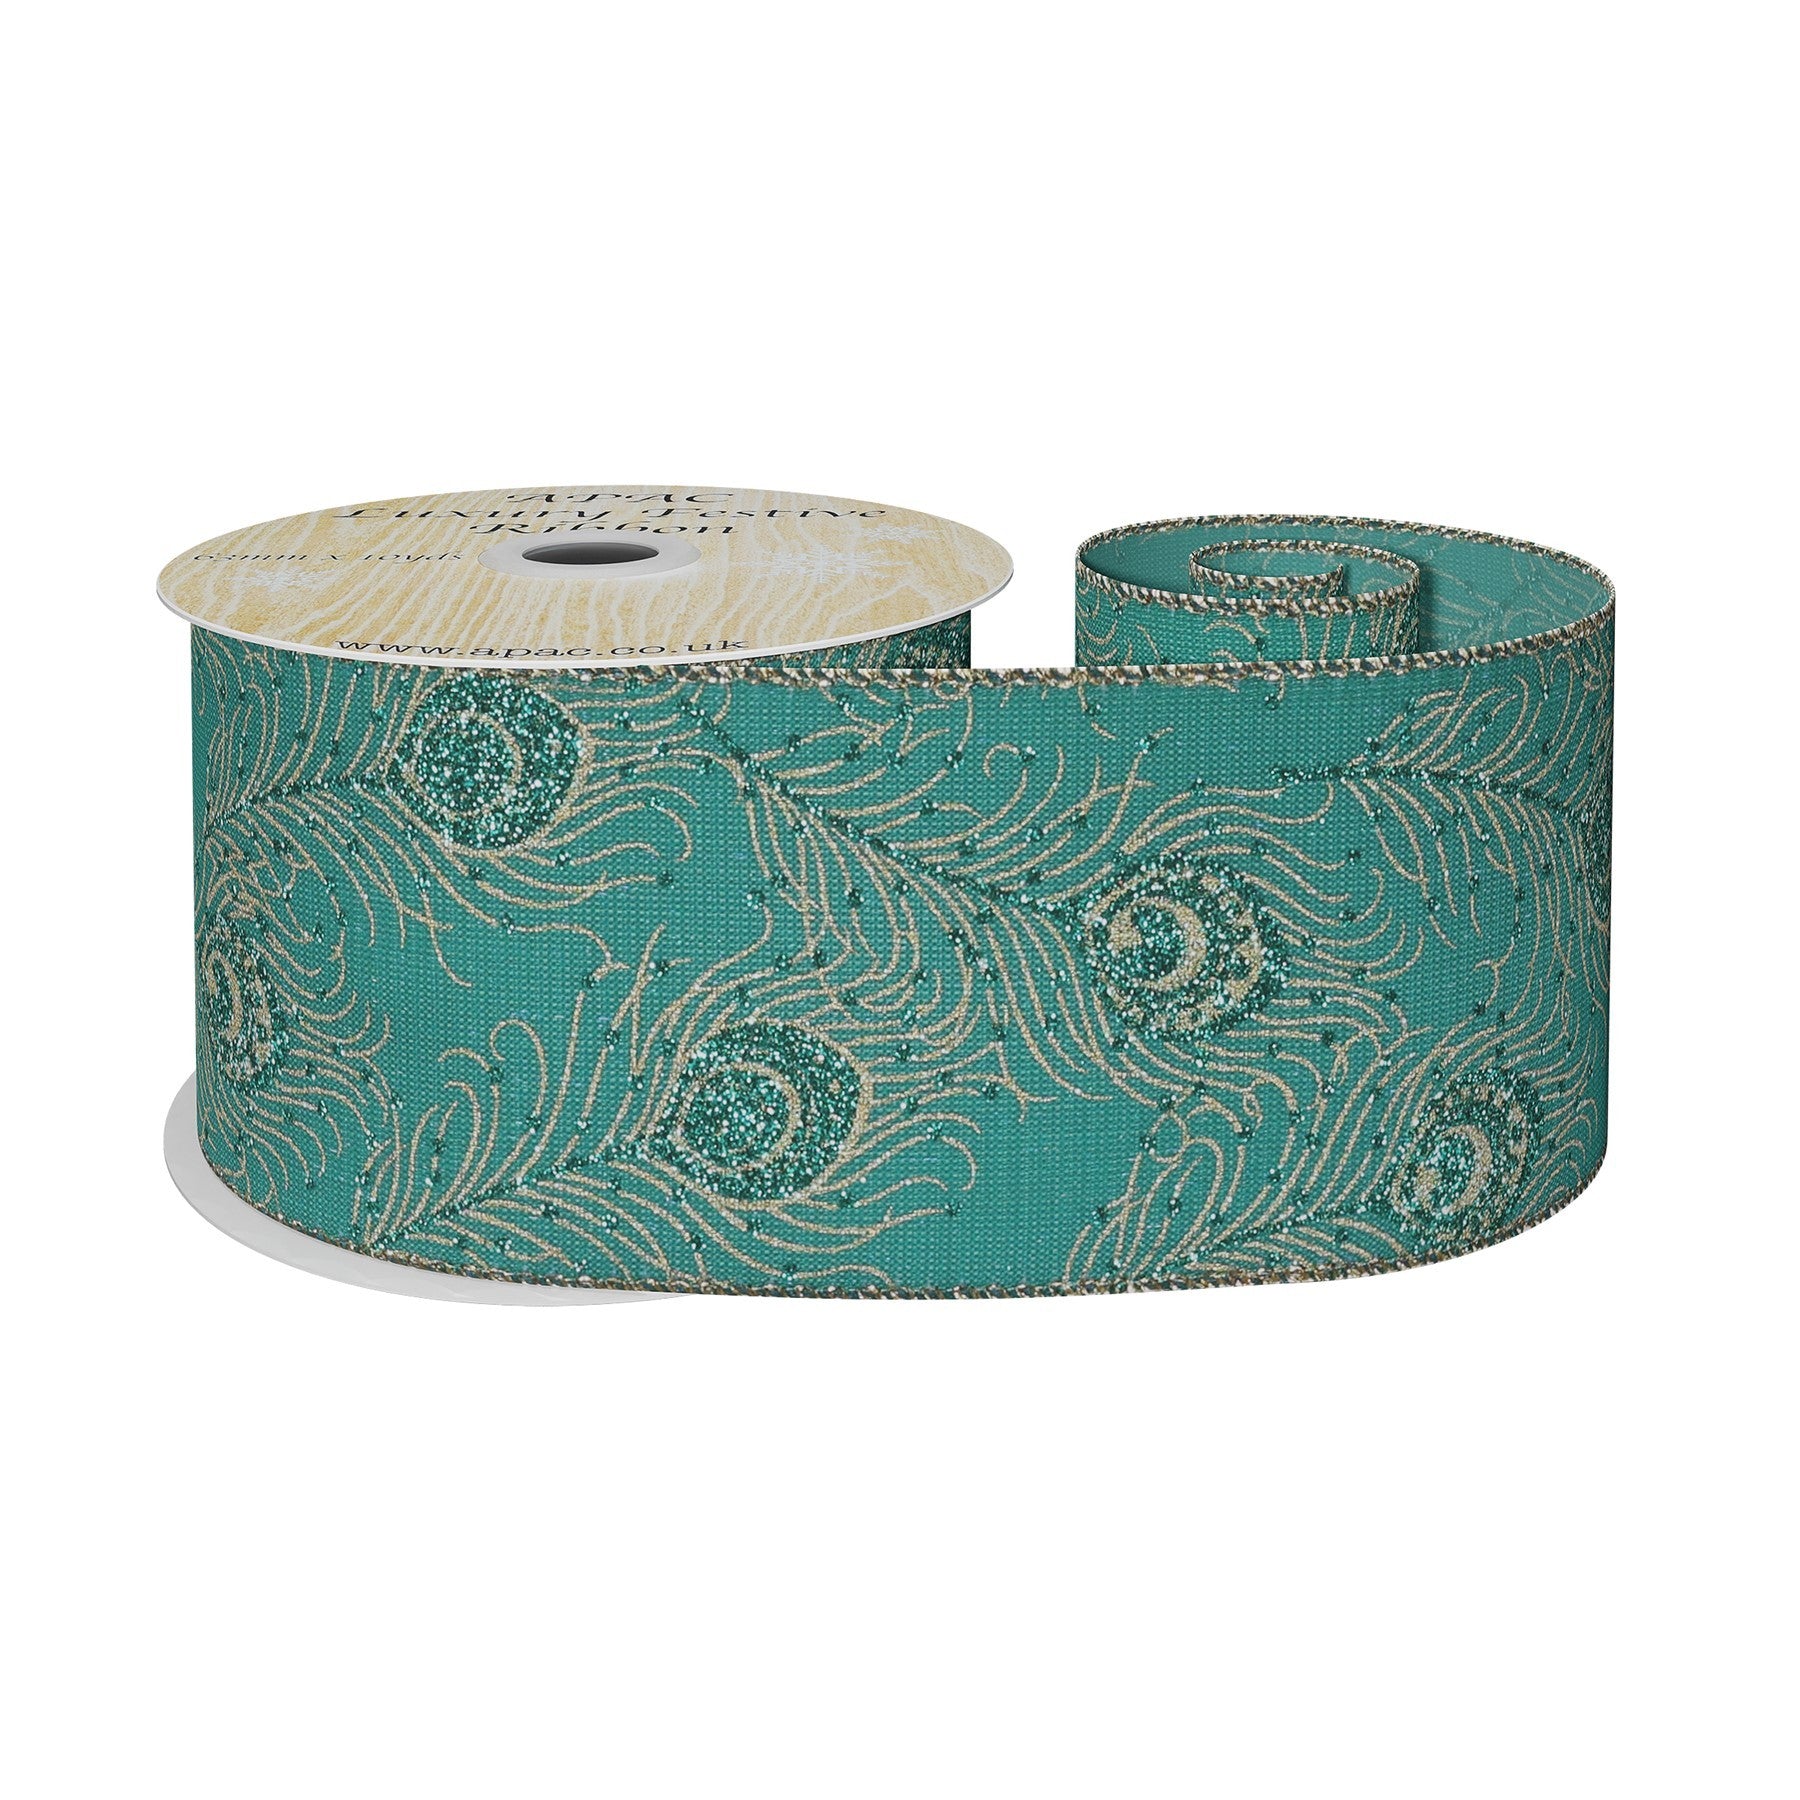 View Turquoise Gold Peacock Ribbon 63mm information